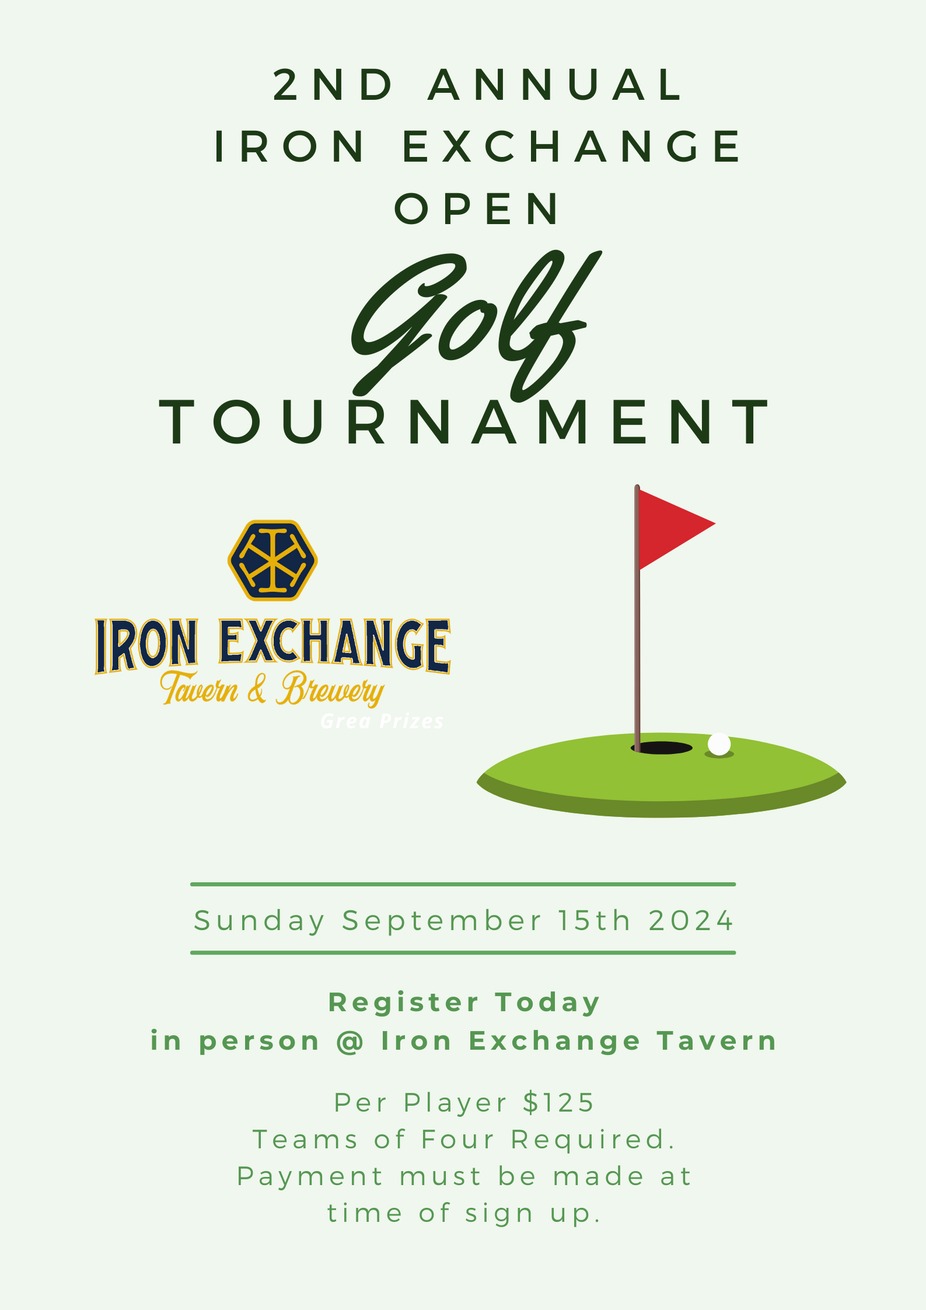 2nd Annual Iron Exchange Open Golf Tournament event photo